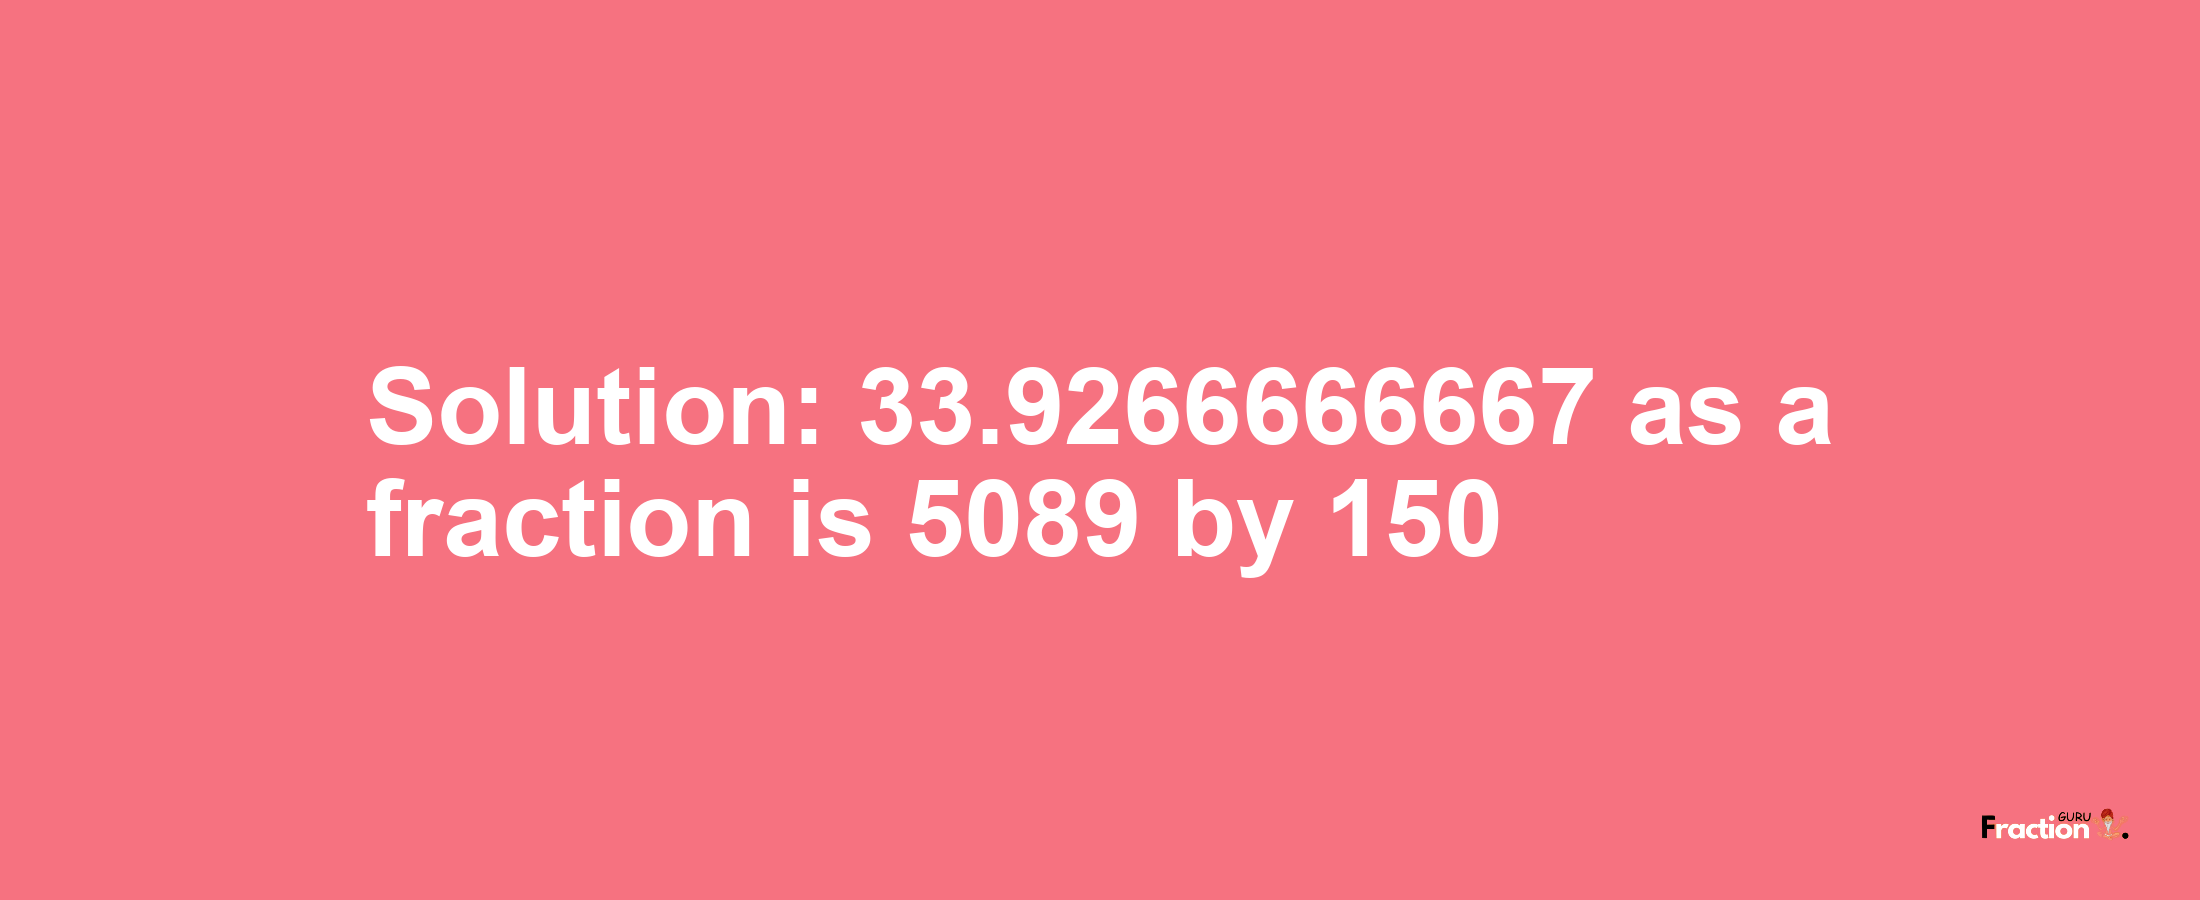 Solution:33.9266666667 as a fraction is 5089/150